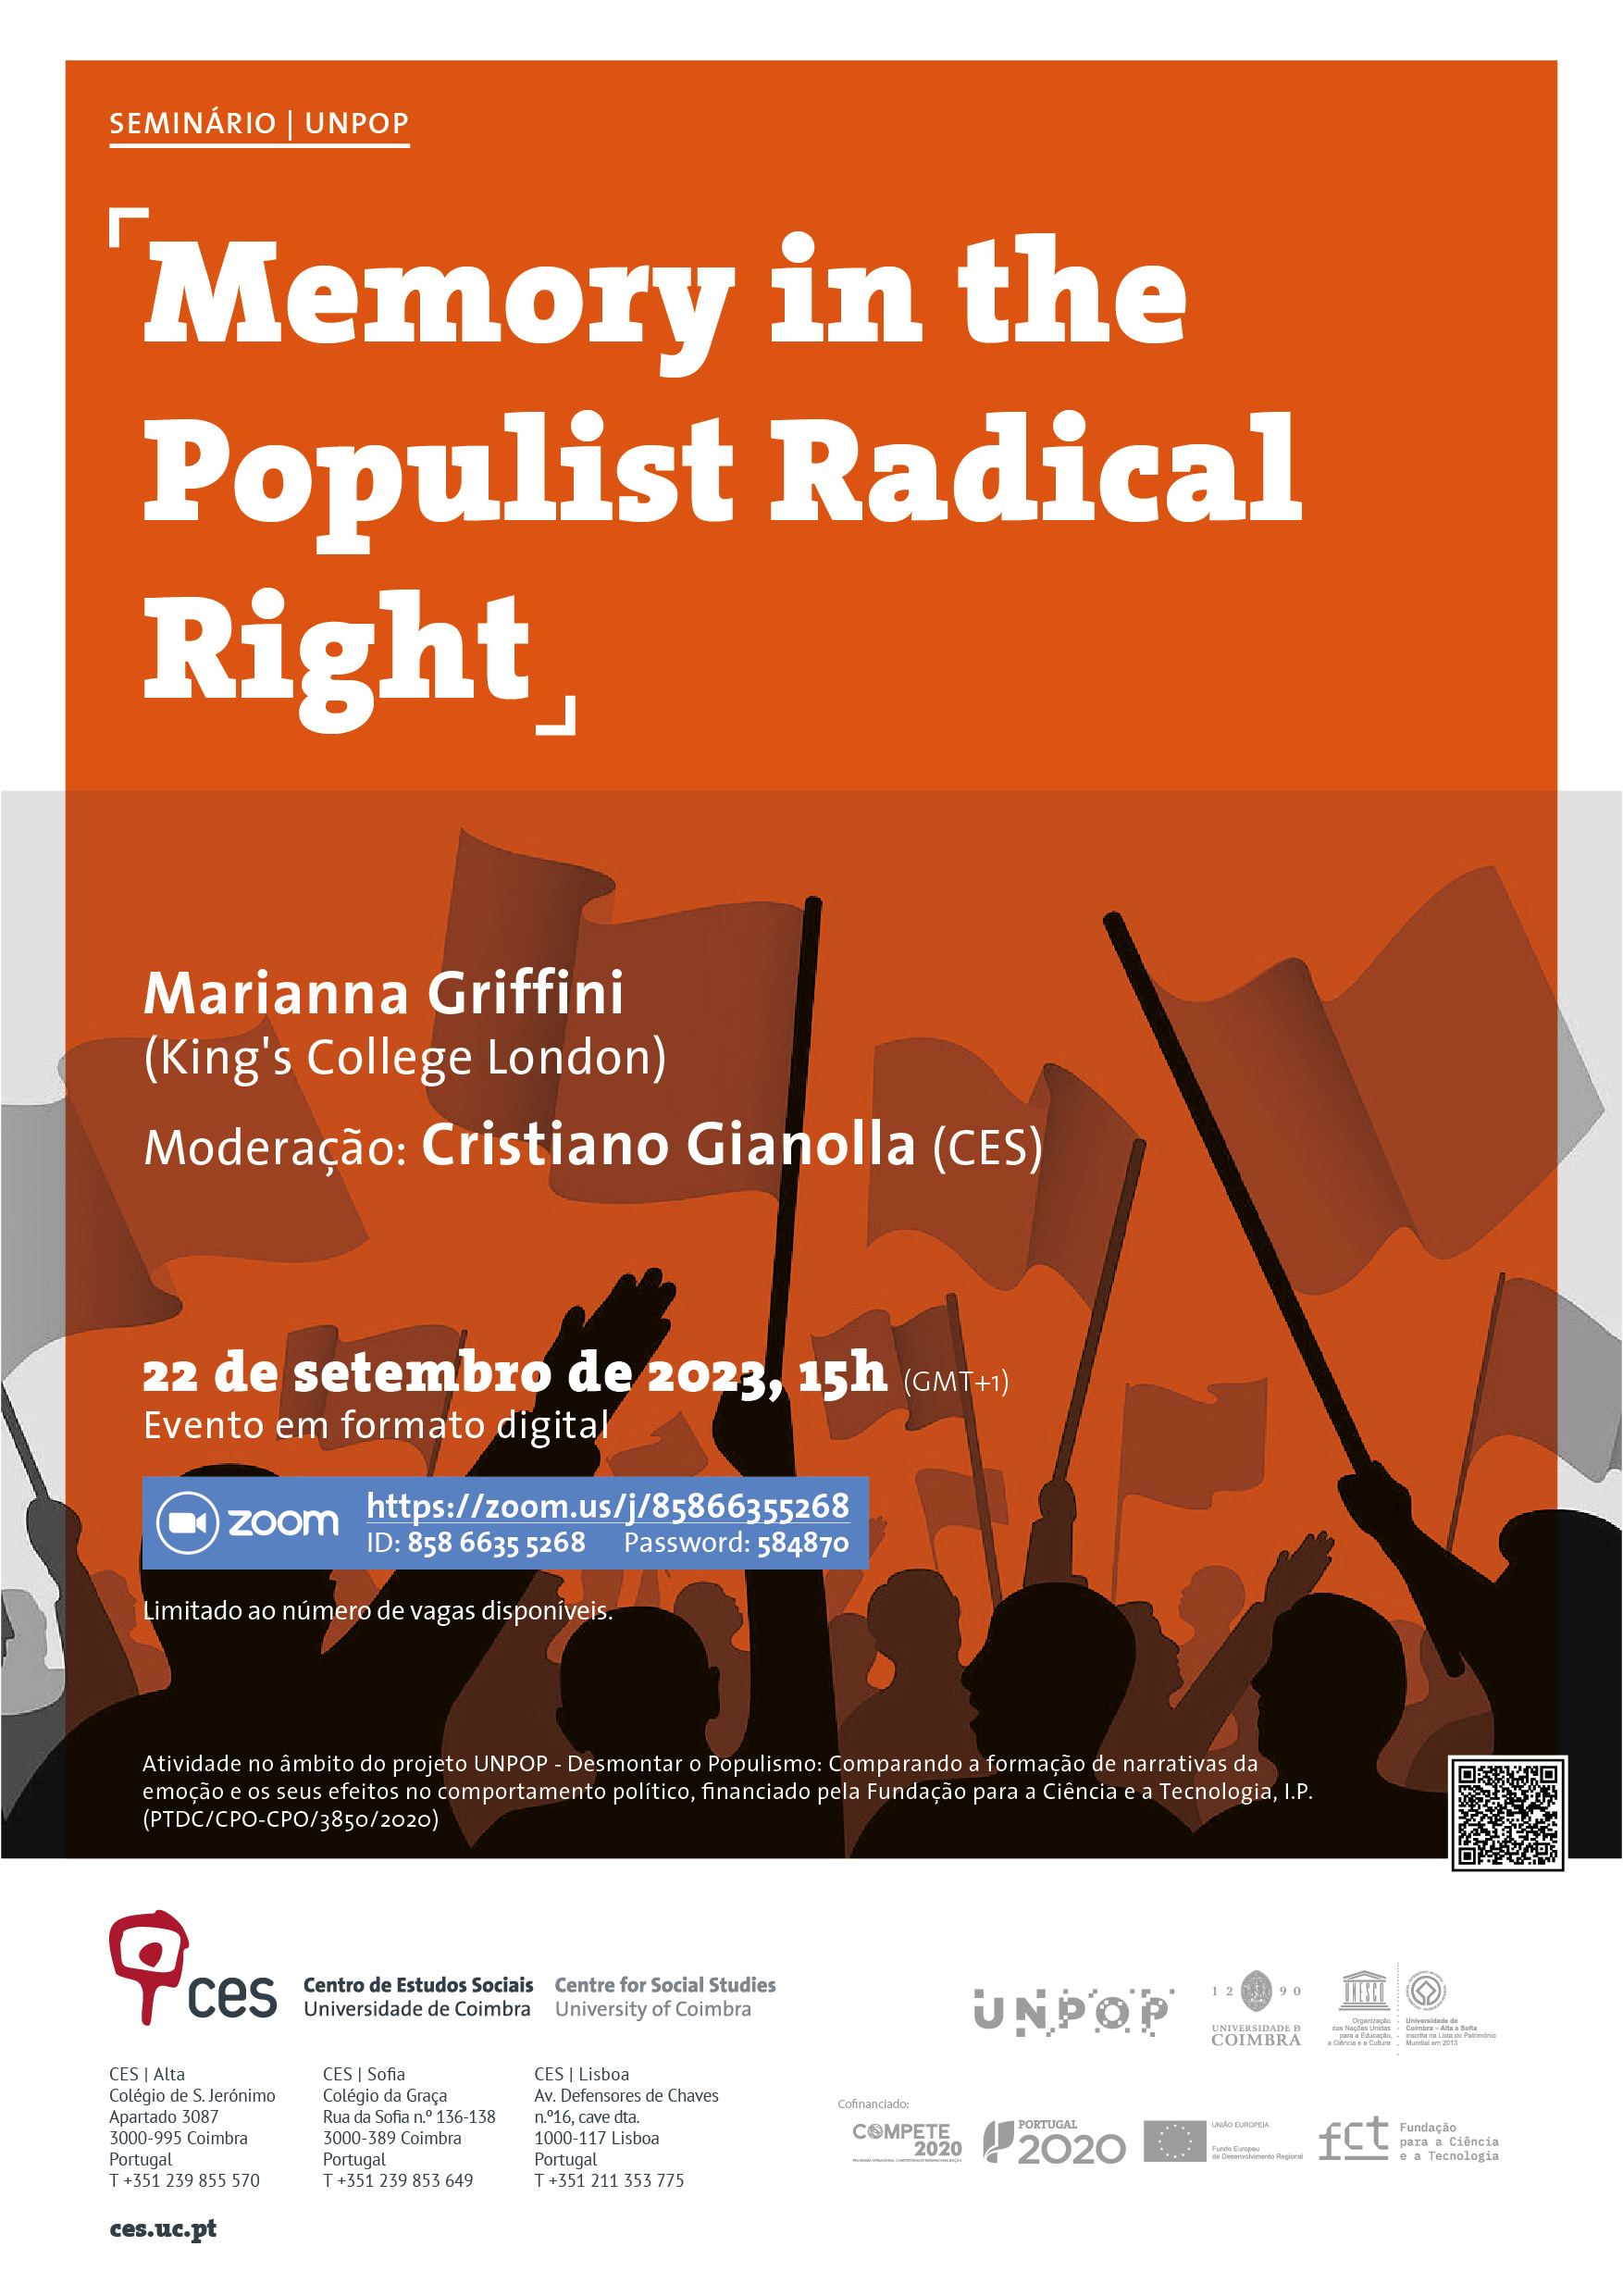 Memory in the Populist Radical Right<span id="edit_43615"><script>$(function() { $('#edit_43615').load( "/myces/user/editobj.php?tipo=evento&id=43615" ); });</script></span>